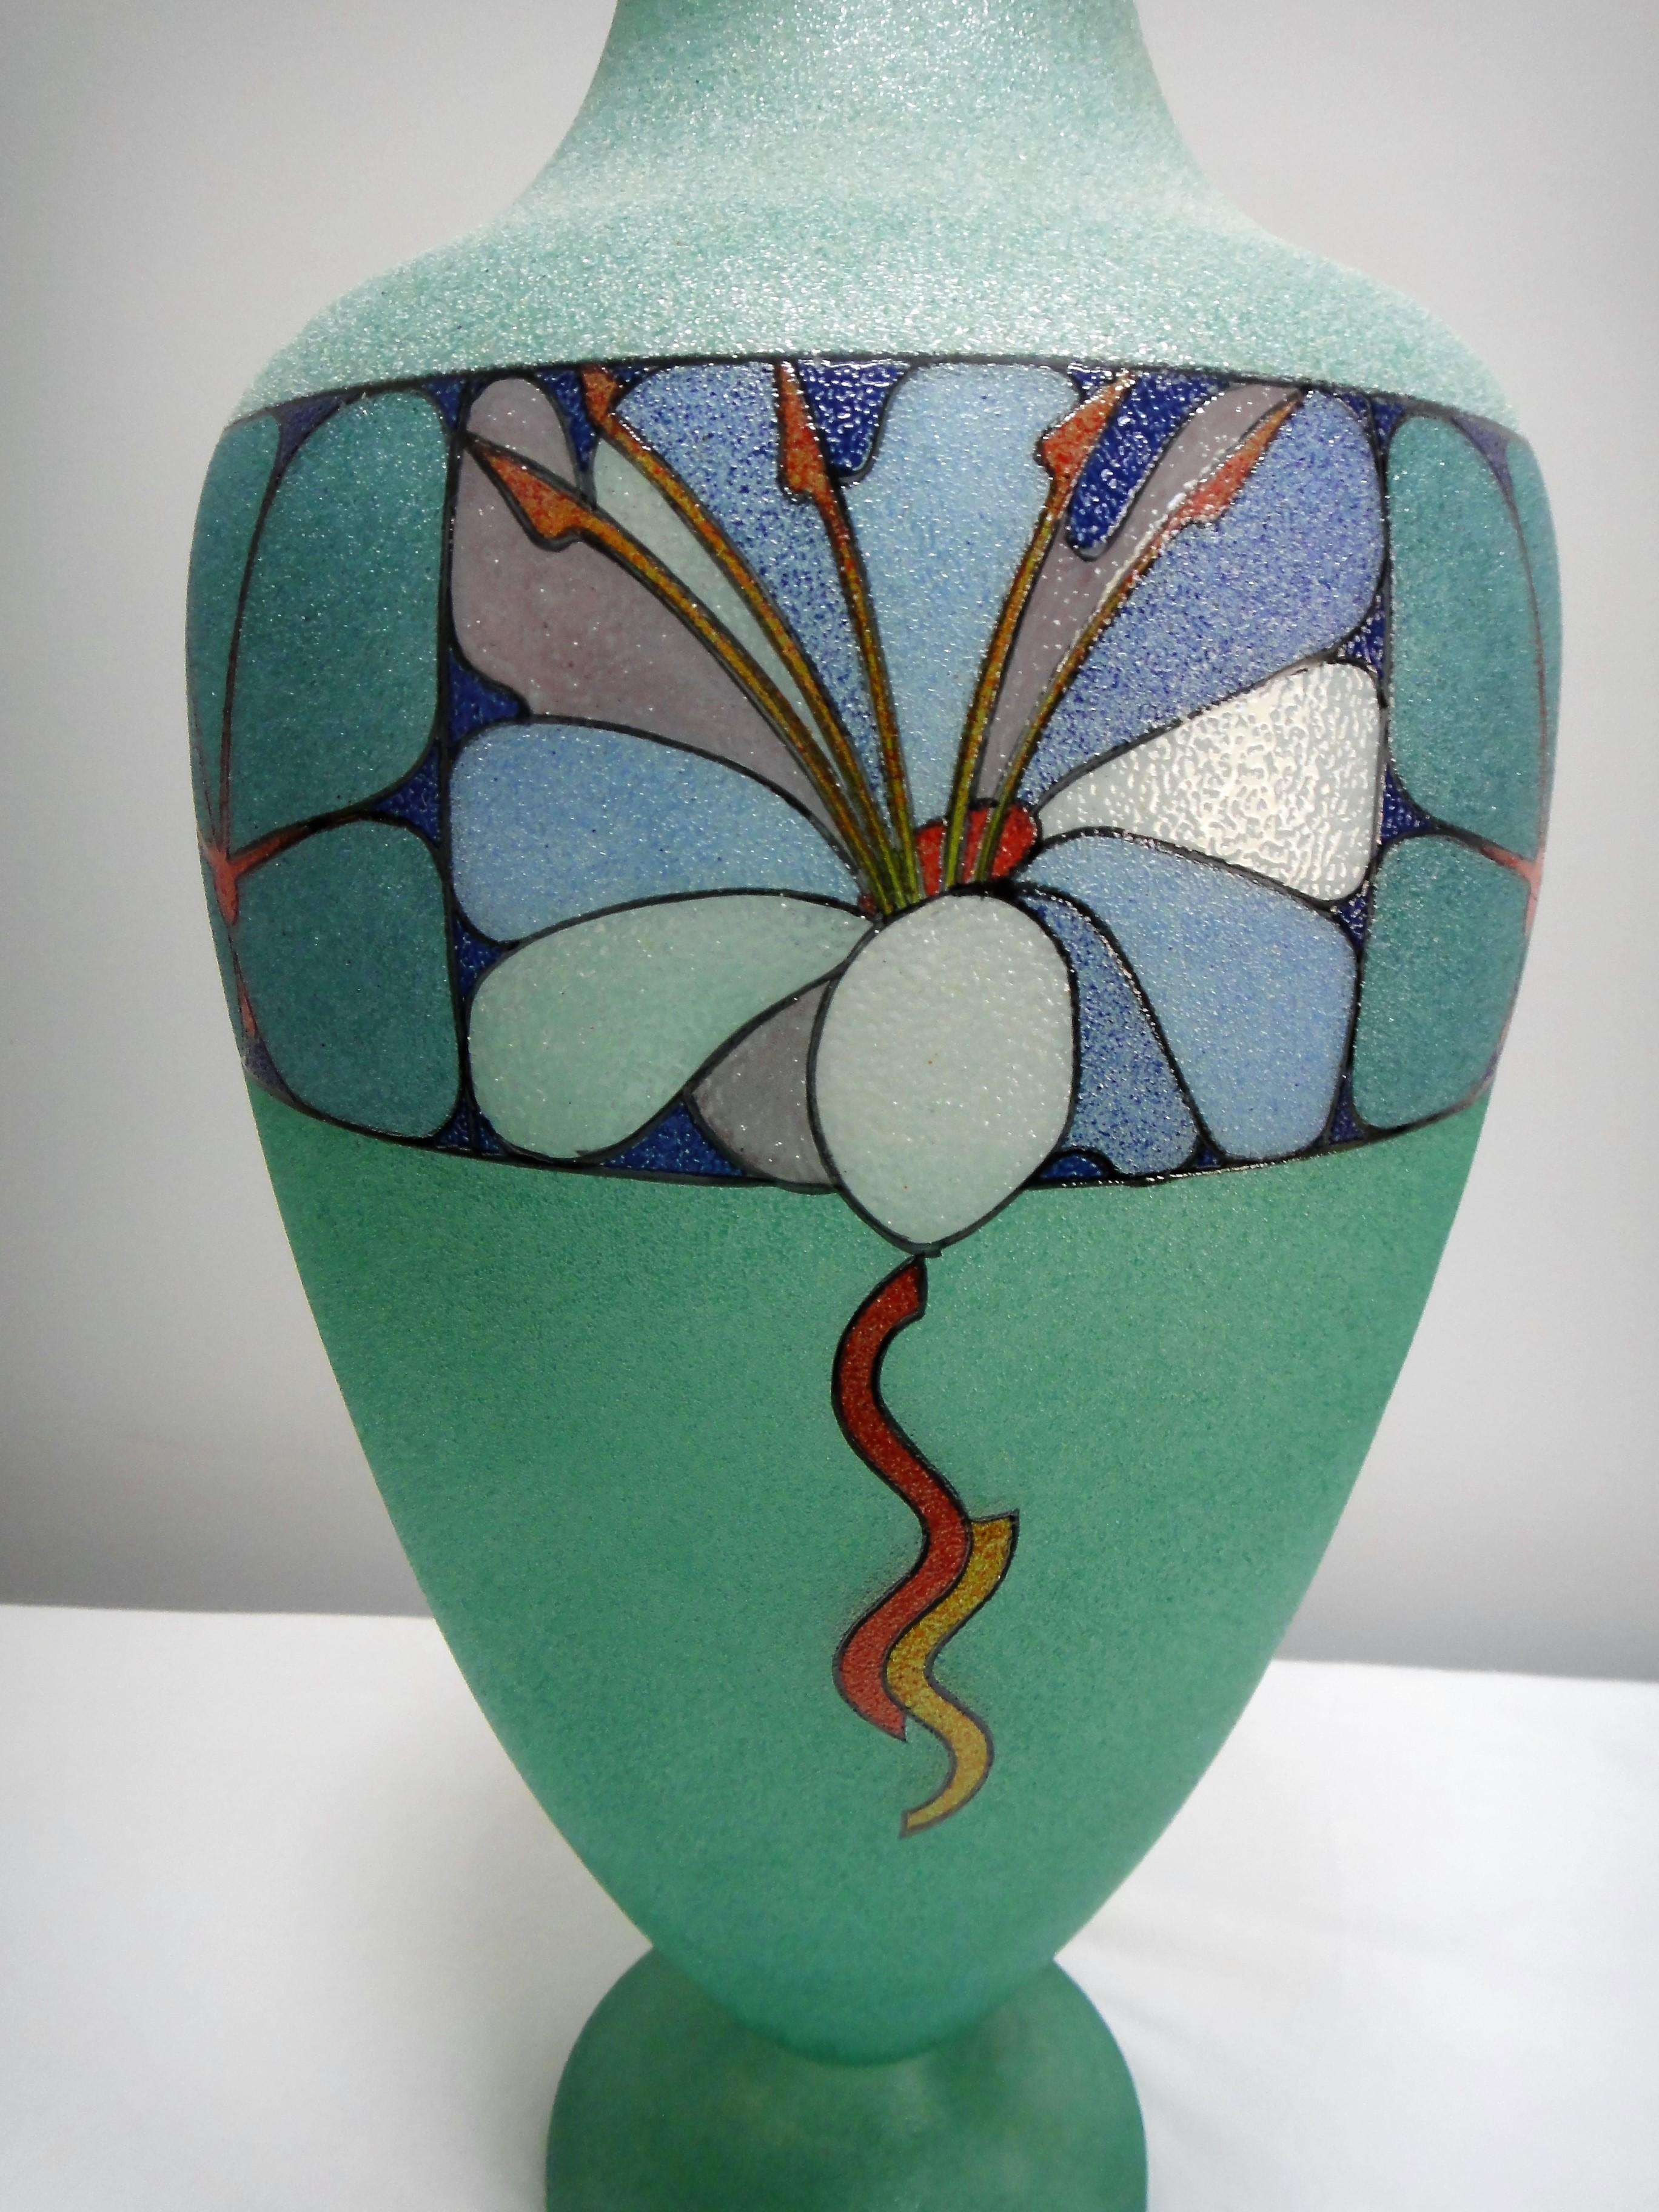 Offered for sale is a large Biancalani Elio handblown and decorated art glass vase with a graniglia glass grit finish. The vase has a floral motif and is created in the Art Deco style.